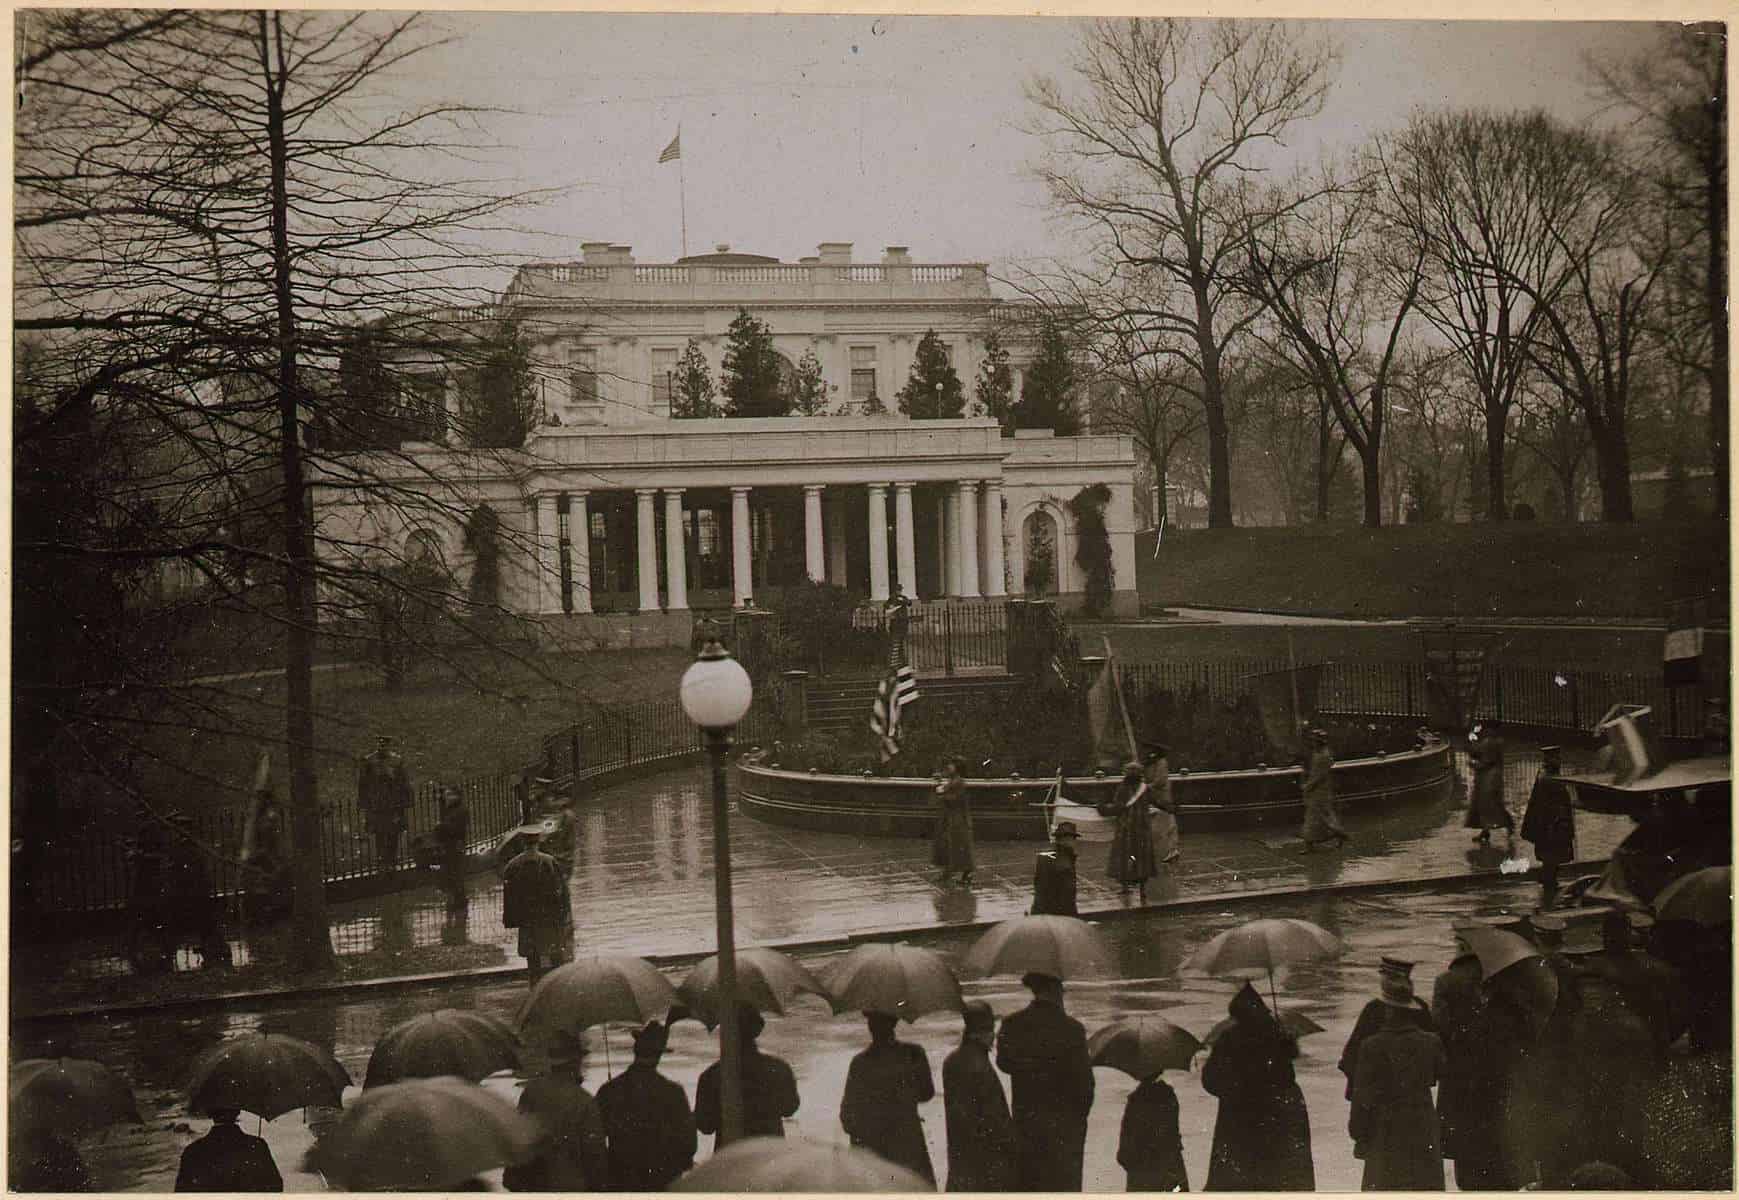 Suffragists picket the White House